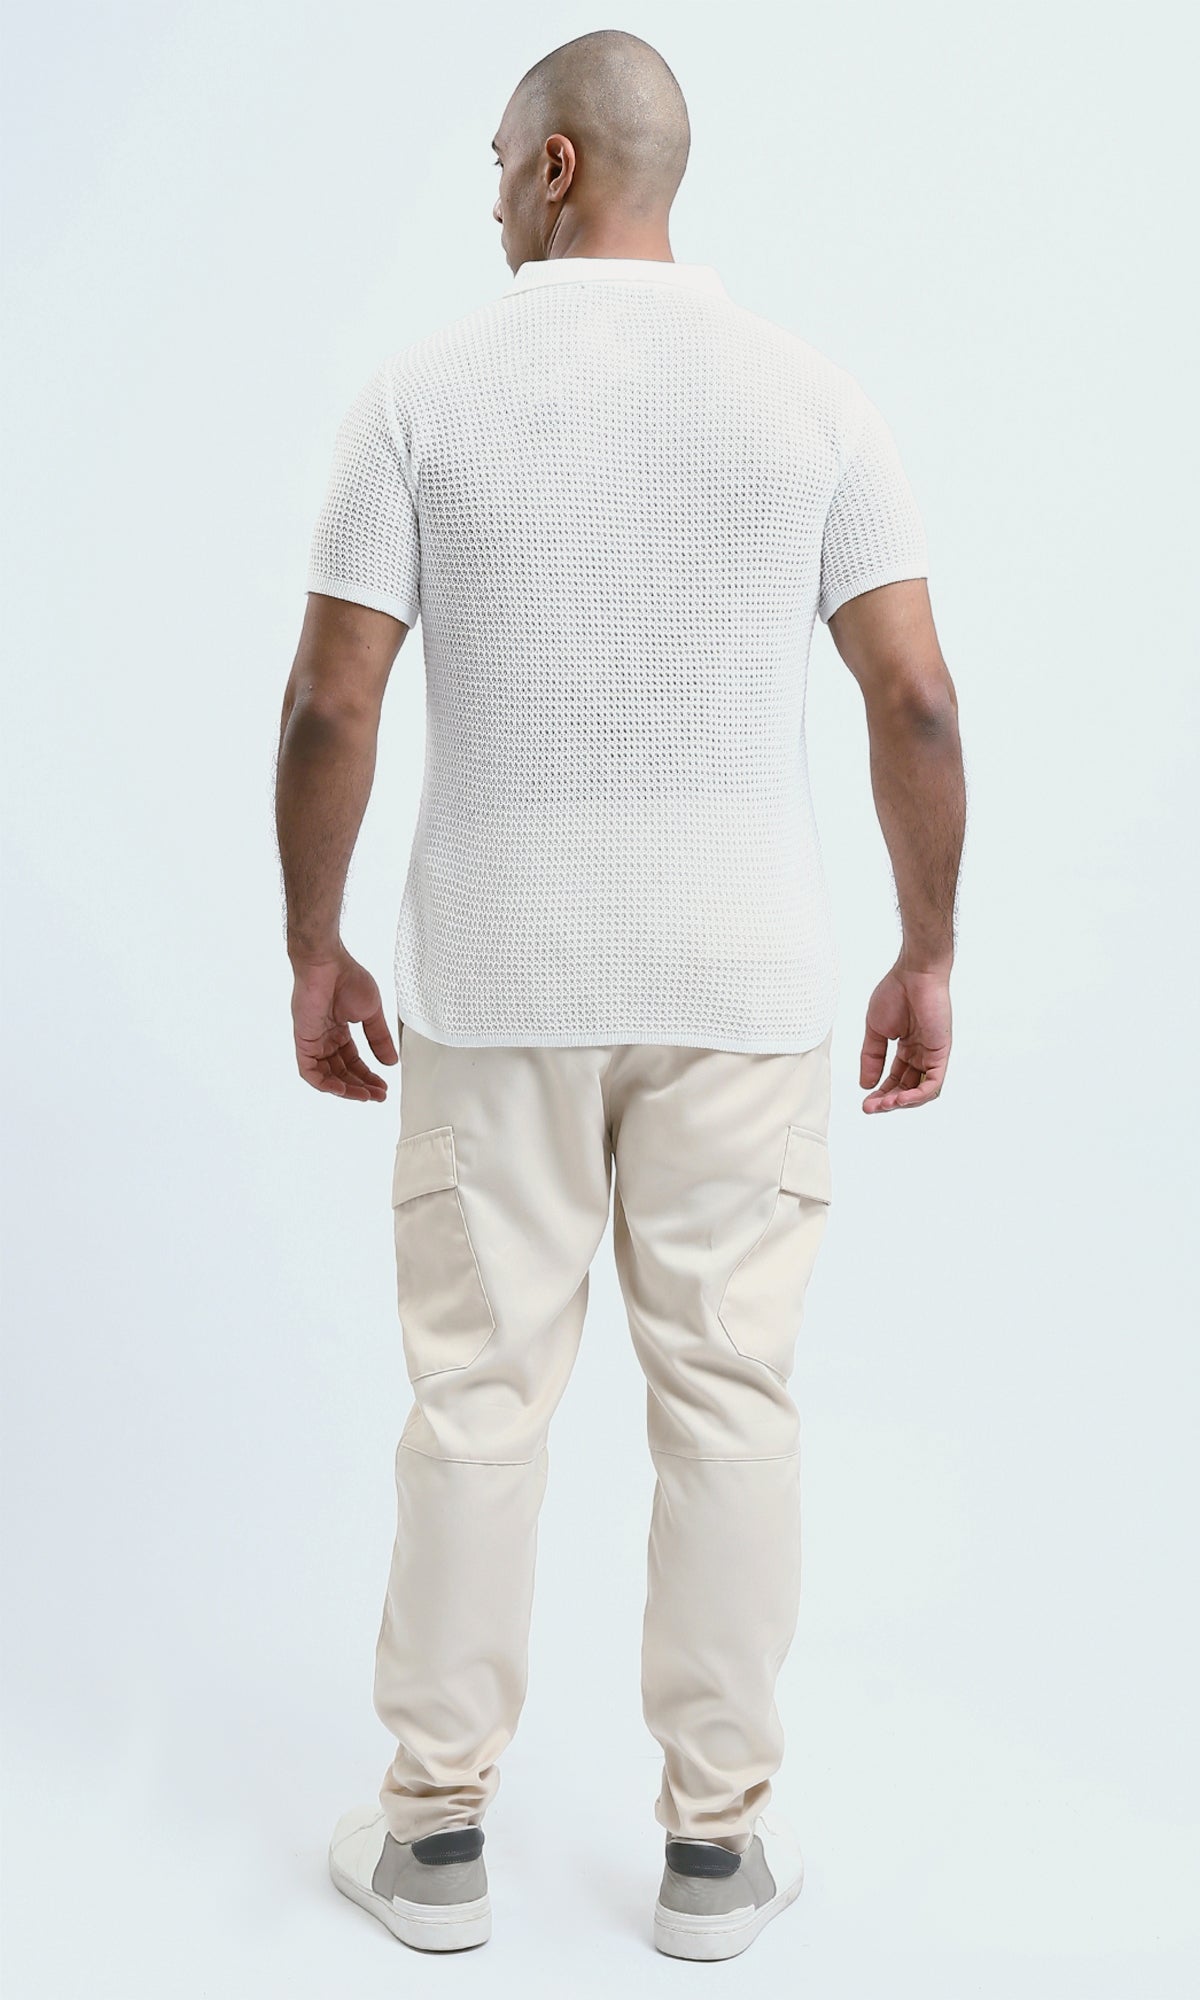 O182756 Buttoned Neck White Knitted Polo Shirt